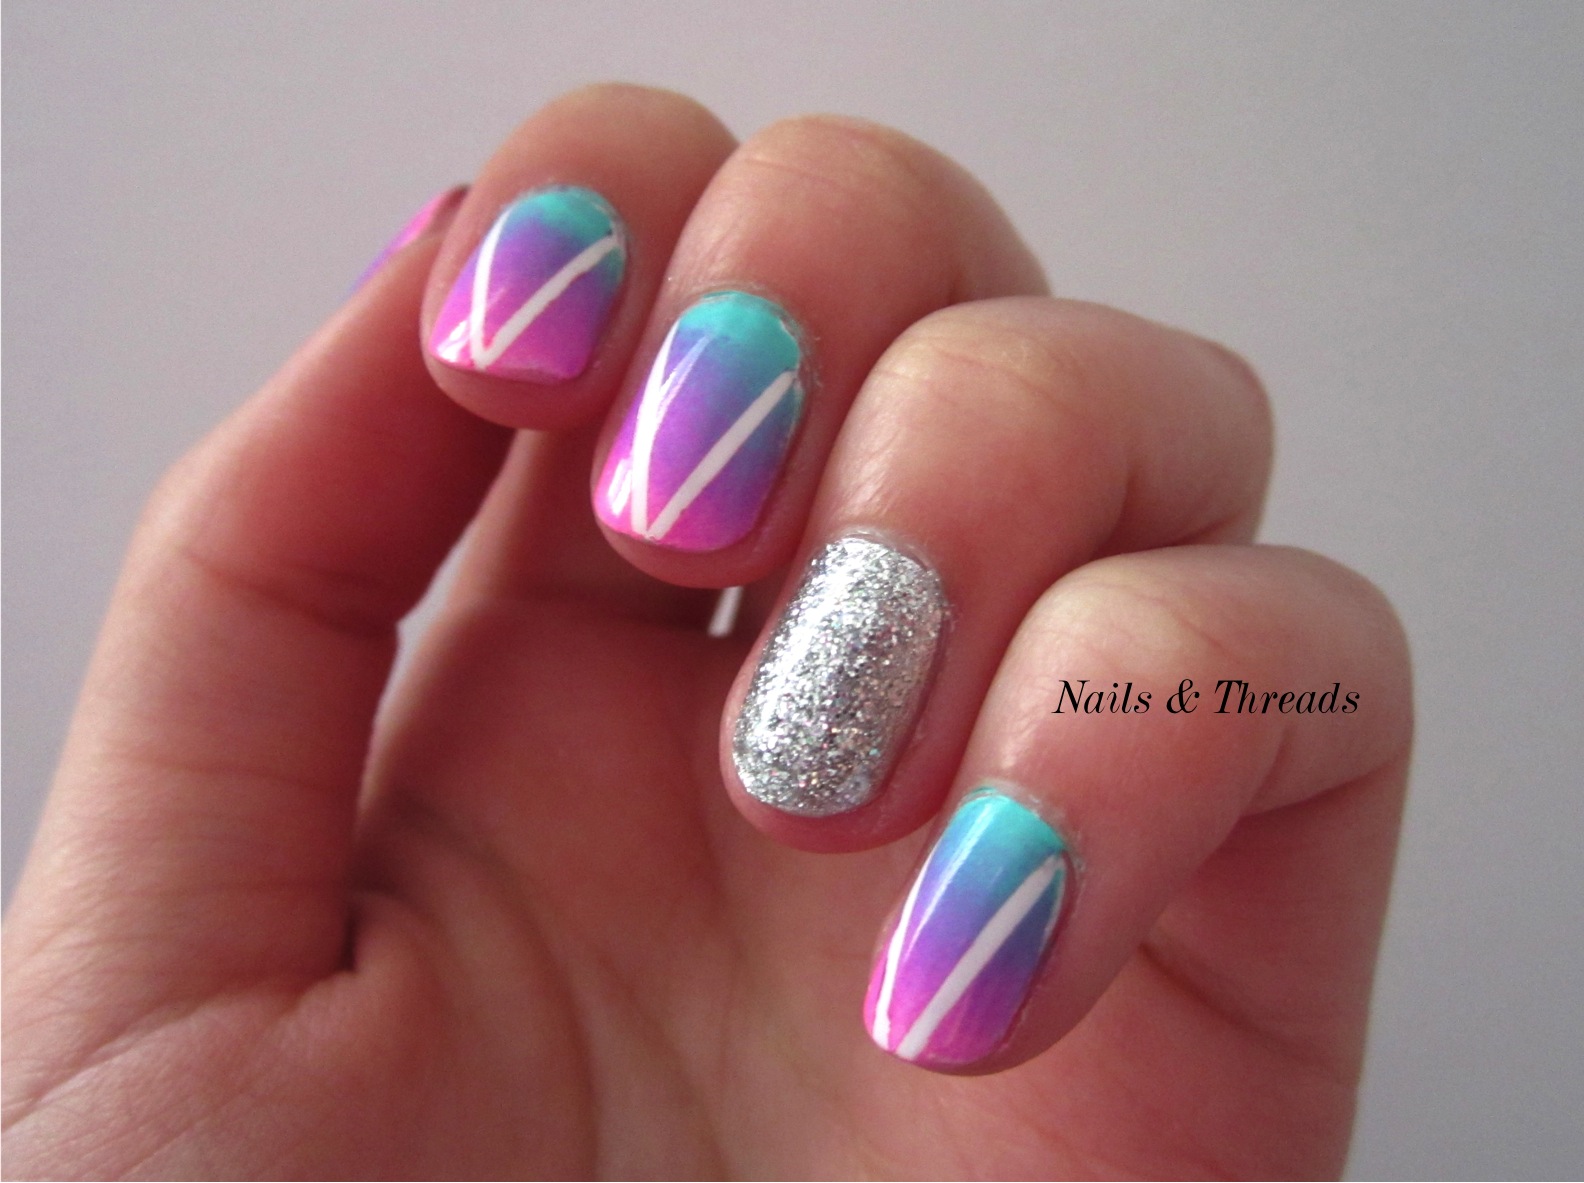 Nails & Threads: Gradient Hipster Nail Art